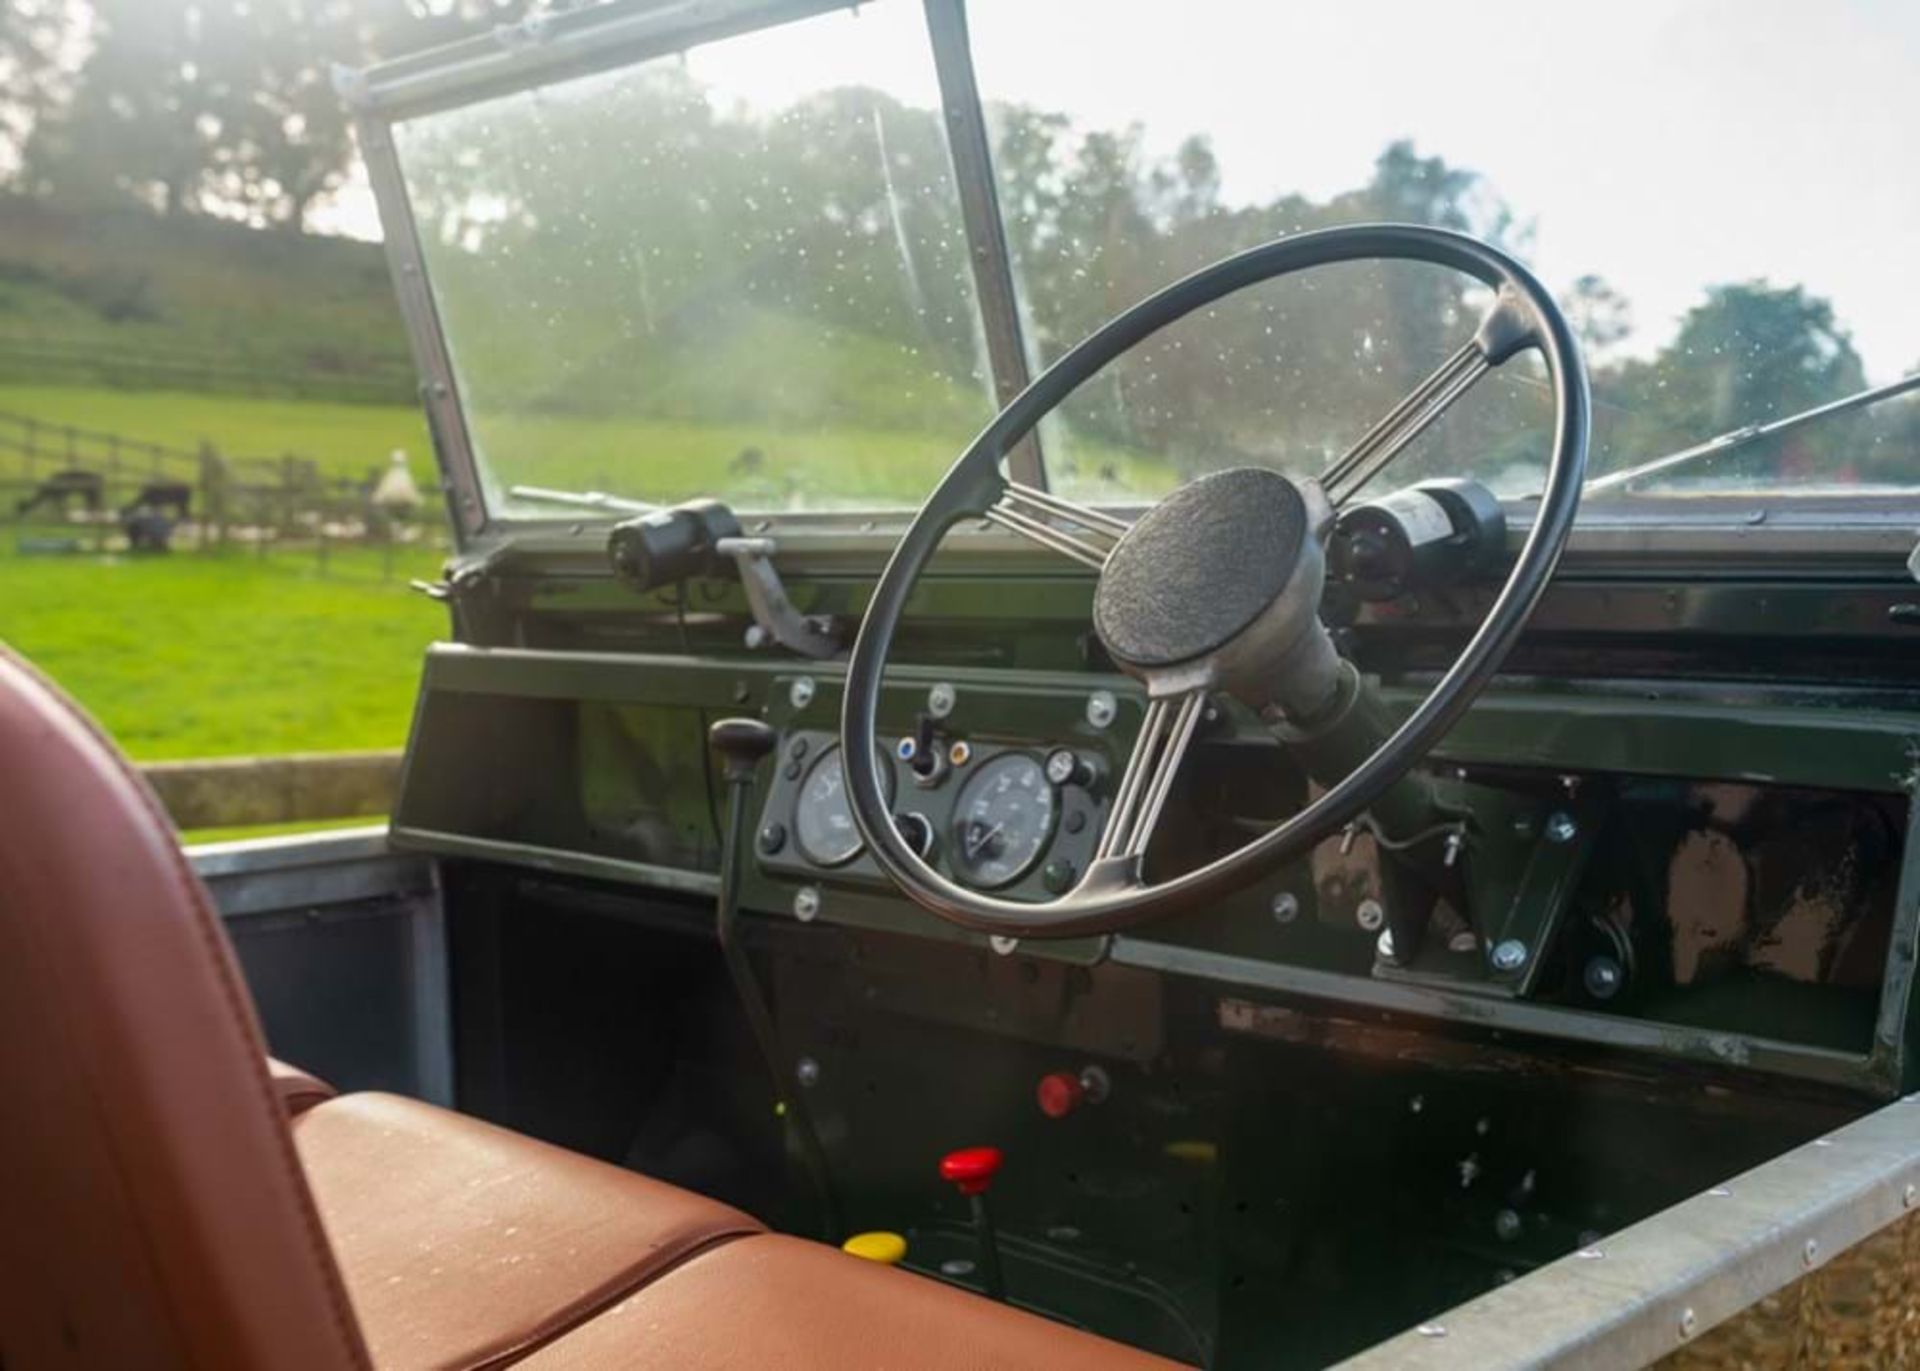 1955 Land Rover Series I (86") - Image 10 of 10